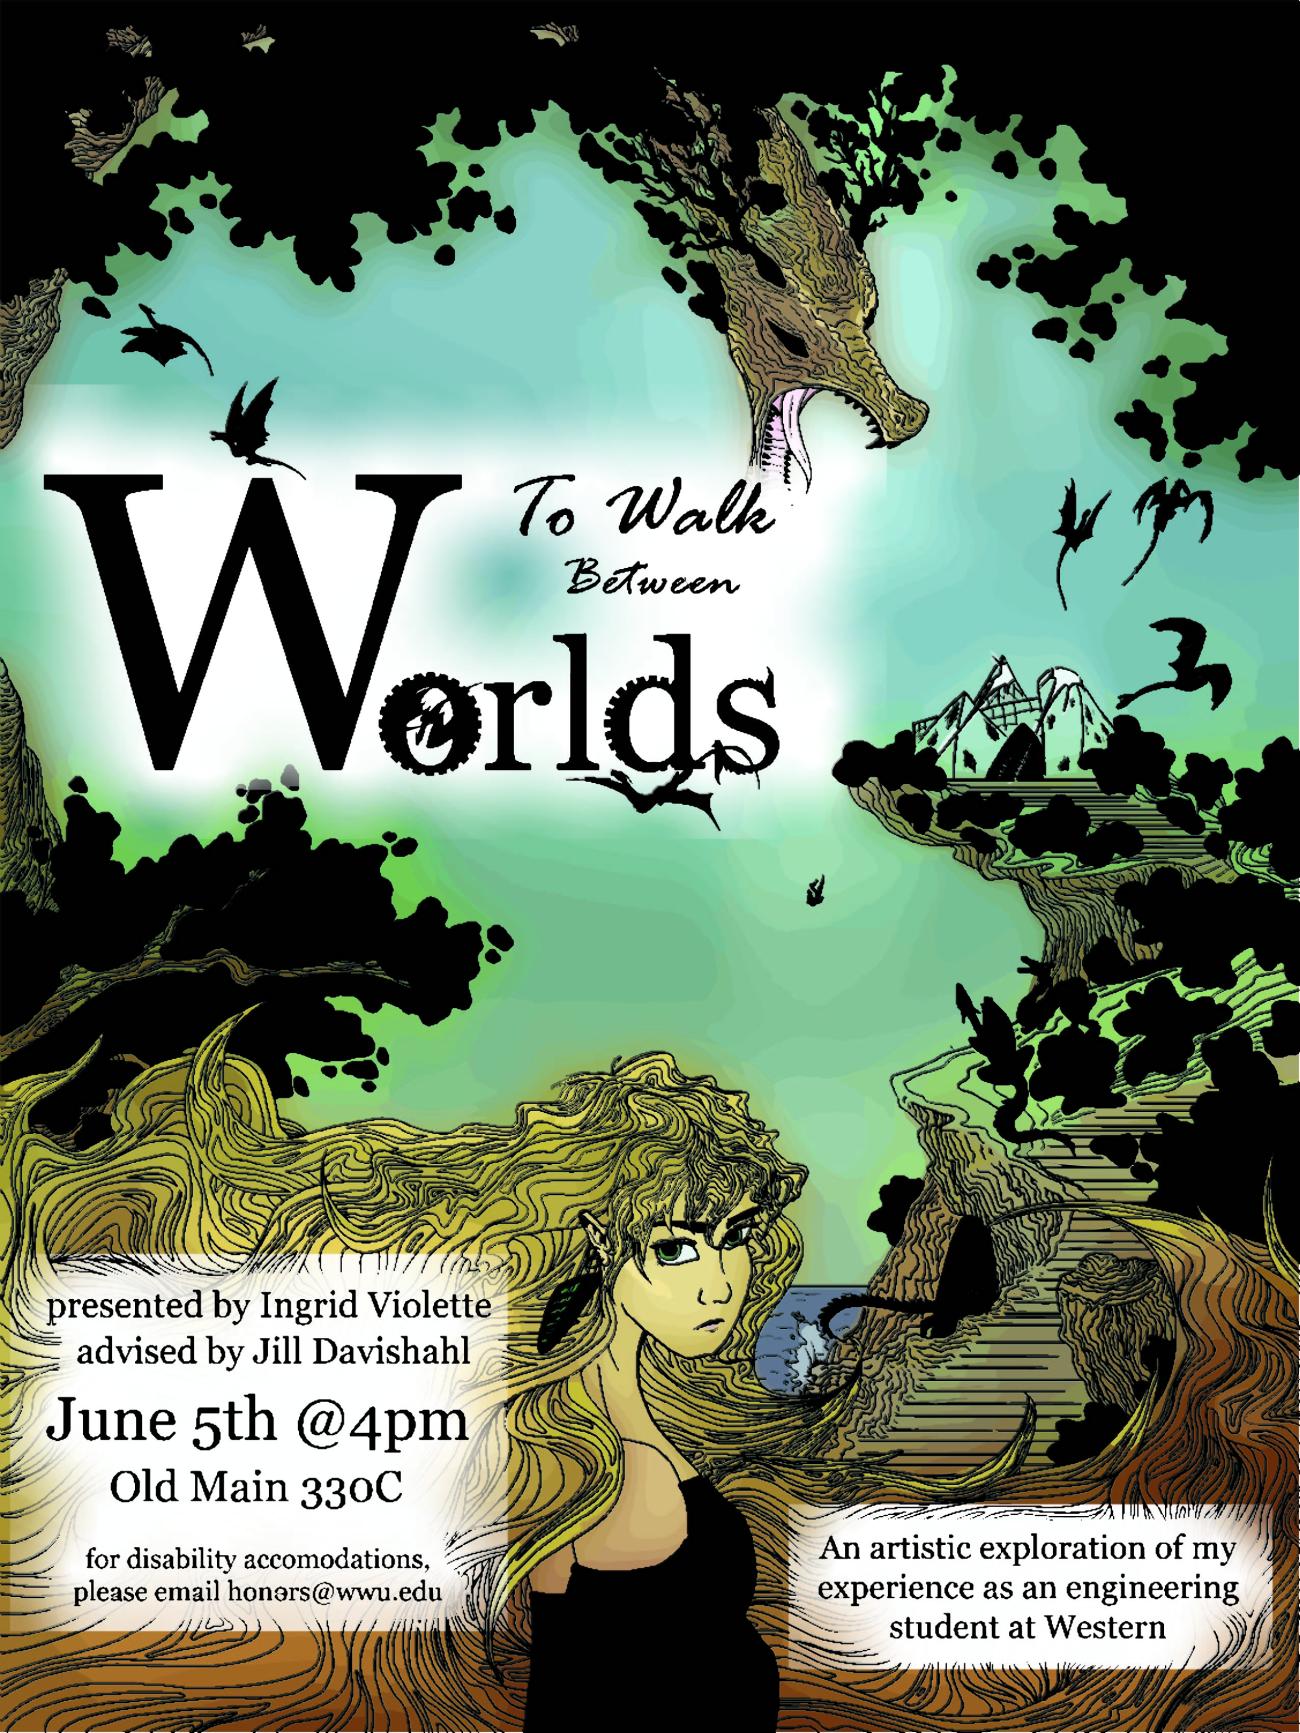 A dragon head extends from the top of the image pointing downward to roar at the Ross Engineering Technology Building. A cliff extends down the right-hand side of the image. At the bottom of the screen is a person looking solemn. Text reads “To Walk Between Worlds. Presented by Ingrid Violette. Advised by Jill Davishahl. June 5th at 4:00 pm. Old Main 330A. For disability accommodations, please email honors@wwu.edu. An artistic exploration of my experience as an engineering student at Western”.